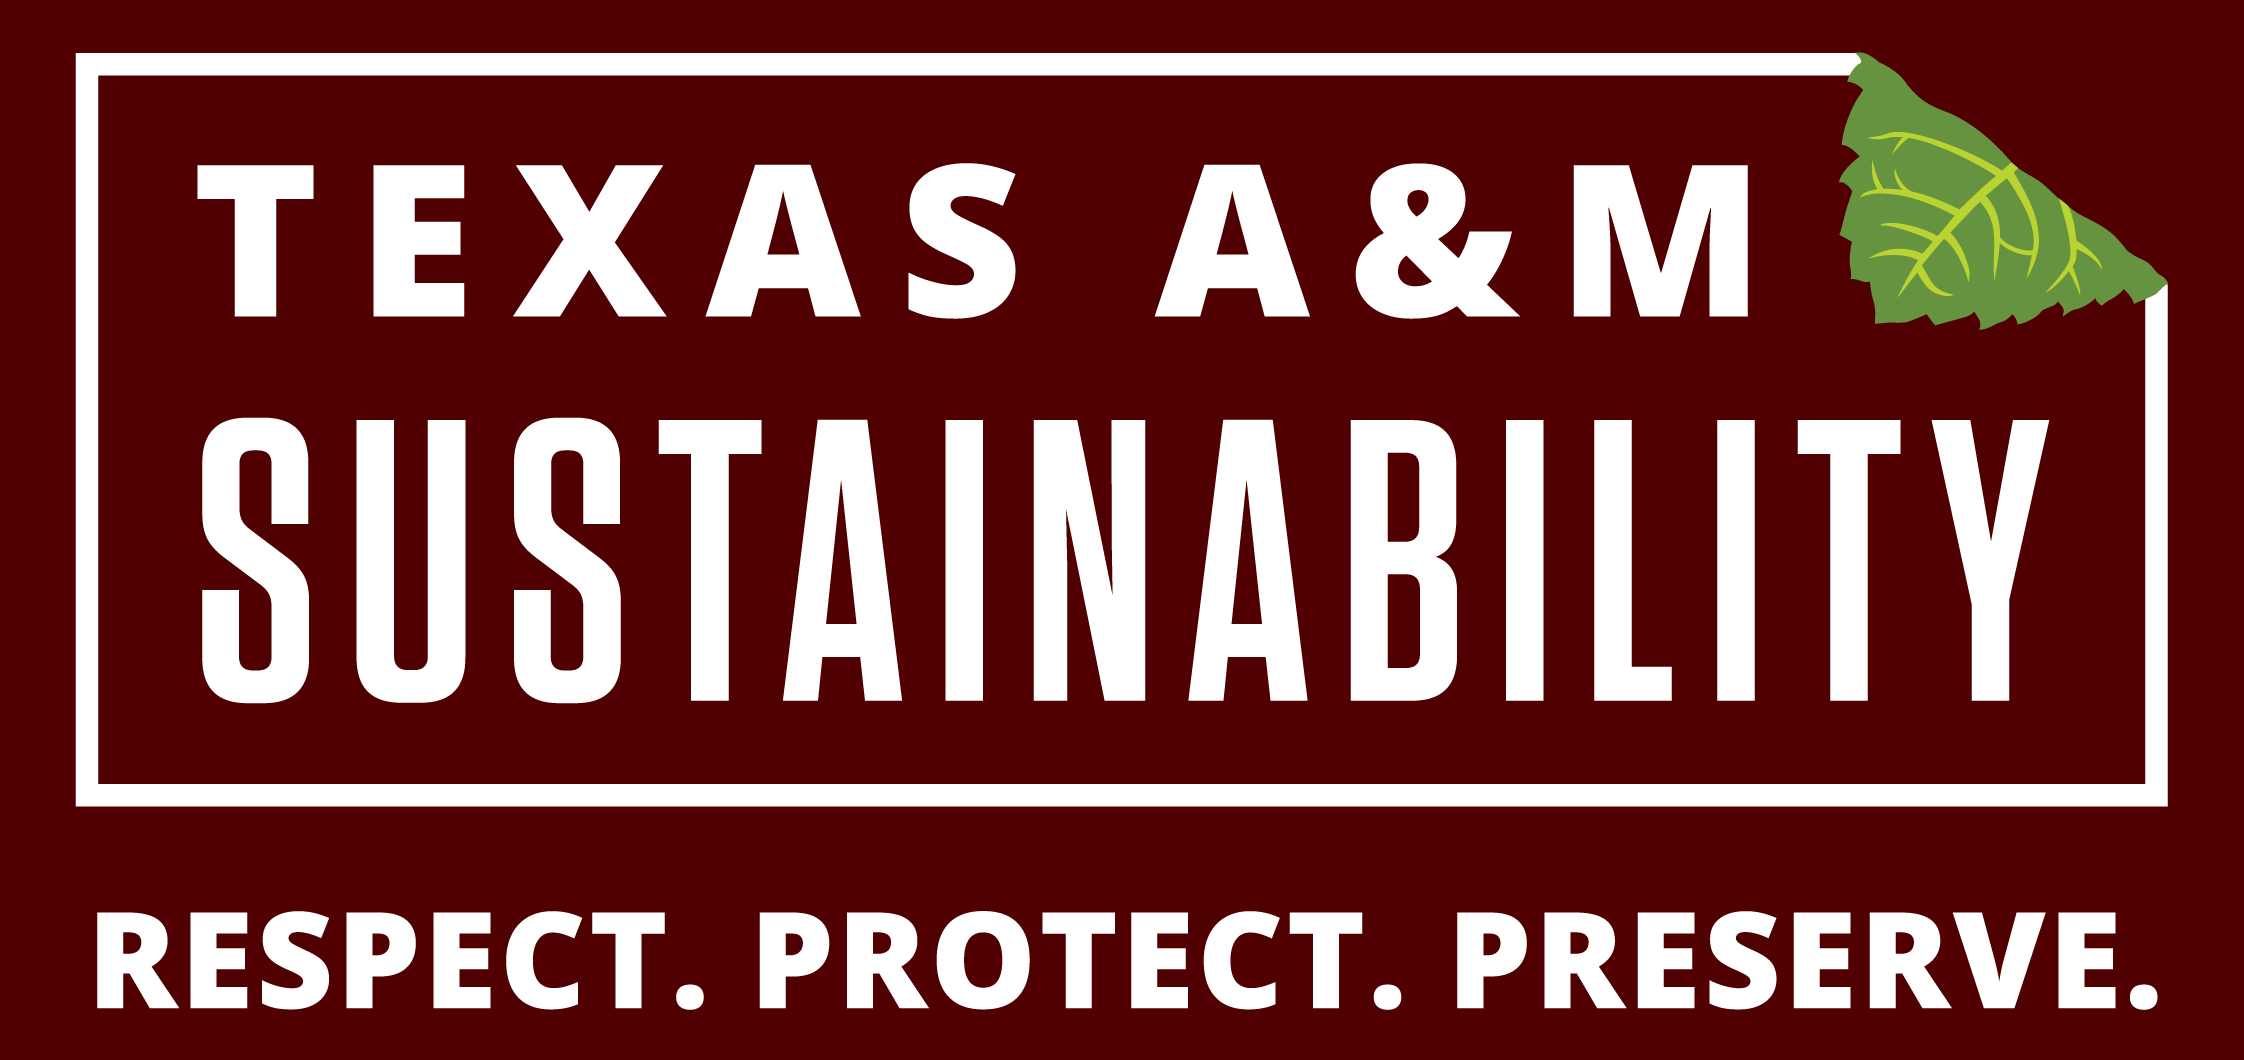 Sustainability graphic in white